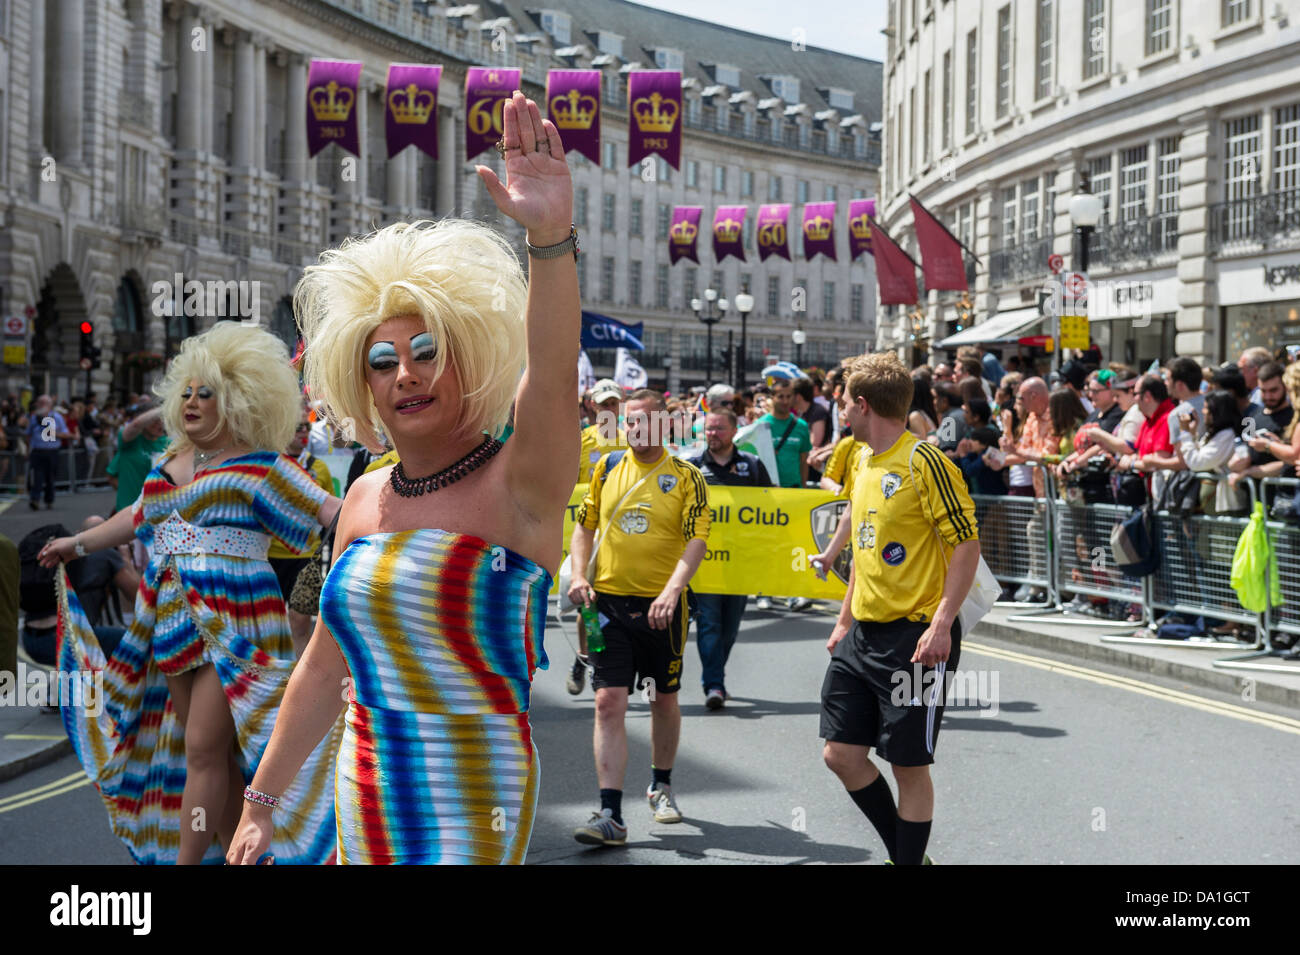 29th June 2013. Participants in the London Pride parade on Regent's Street. Photographer: Gordon Scammell Stock Photo